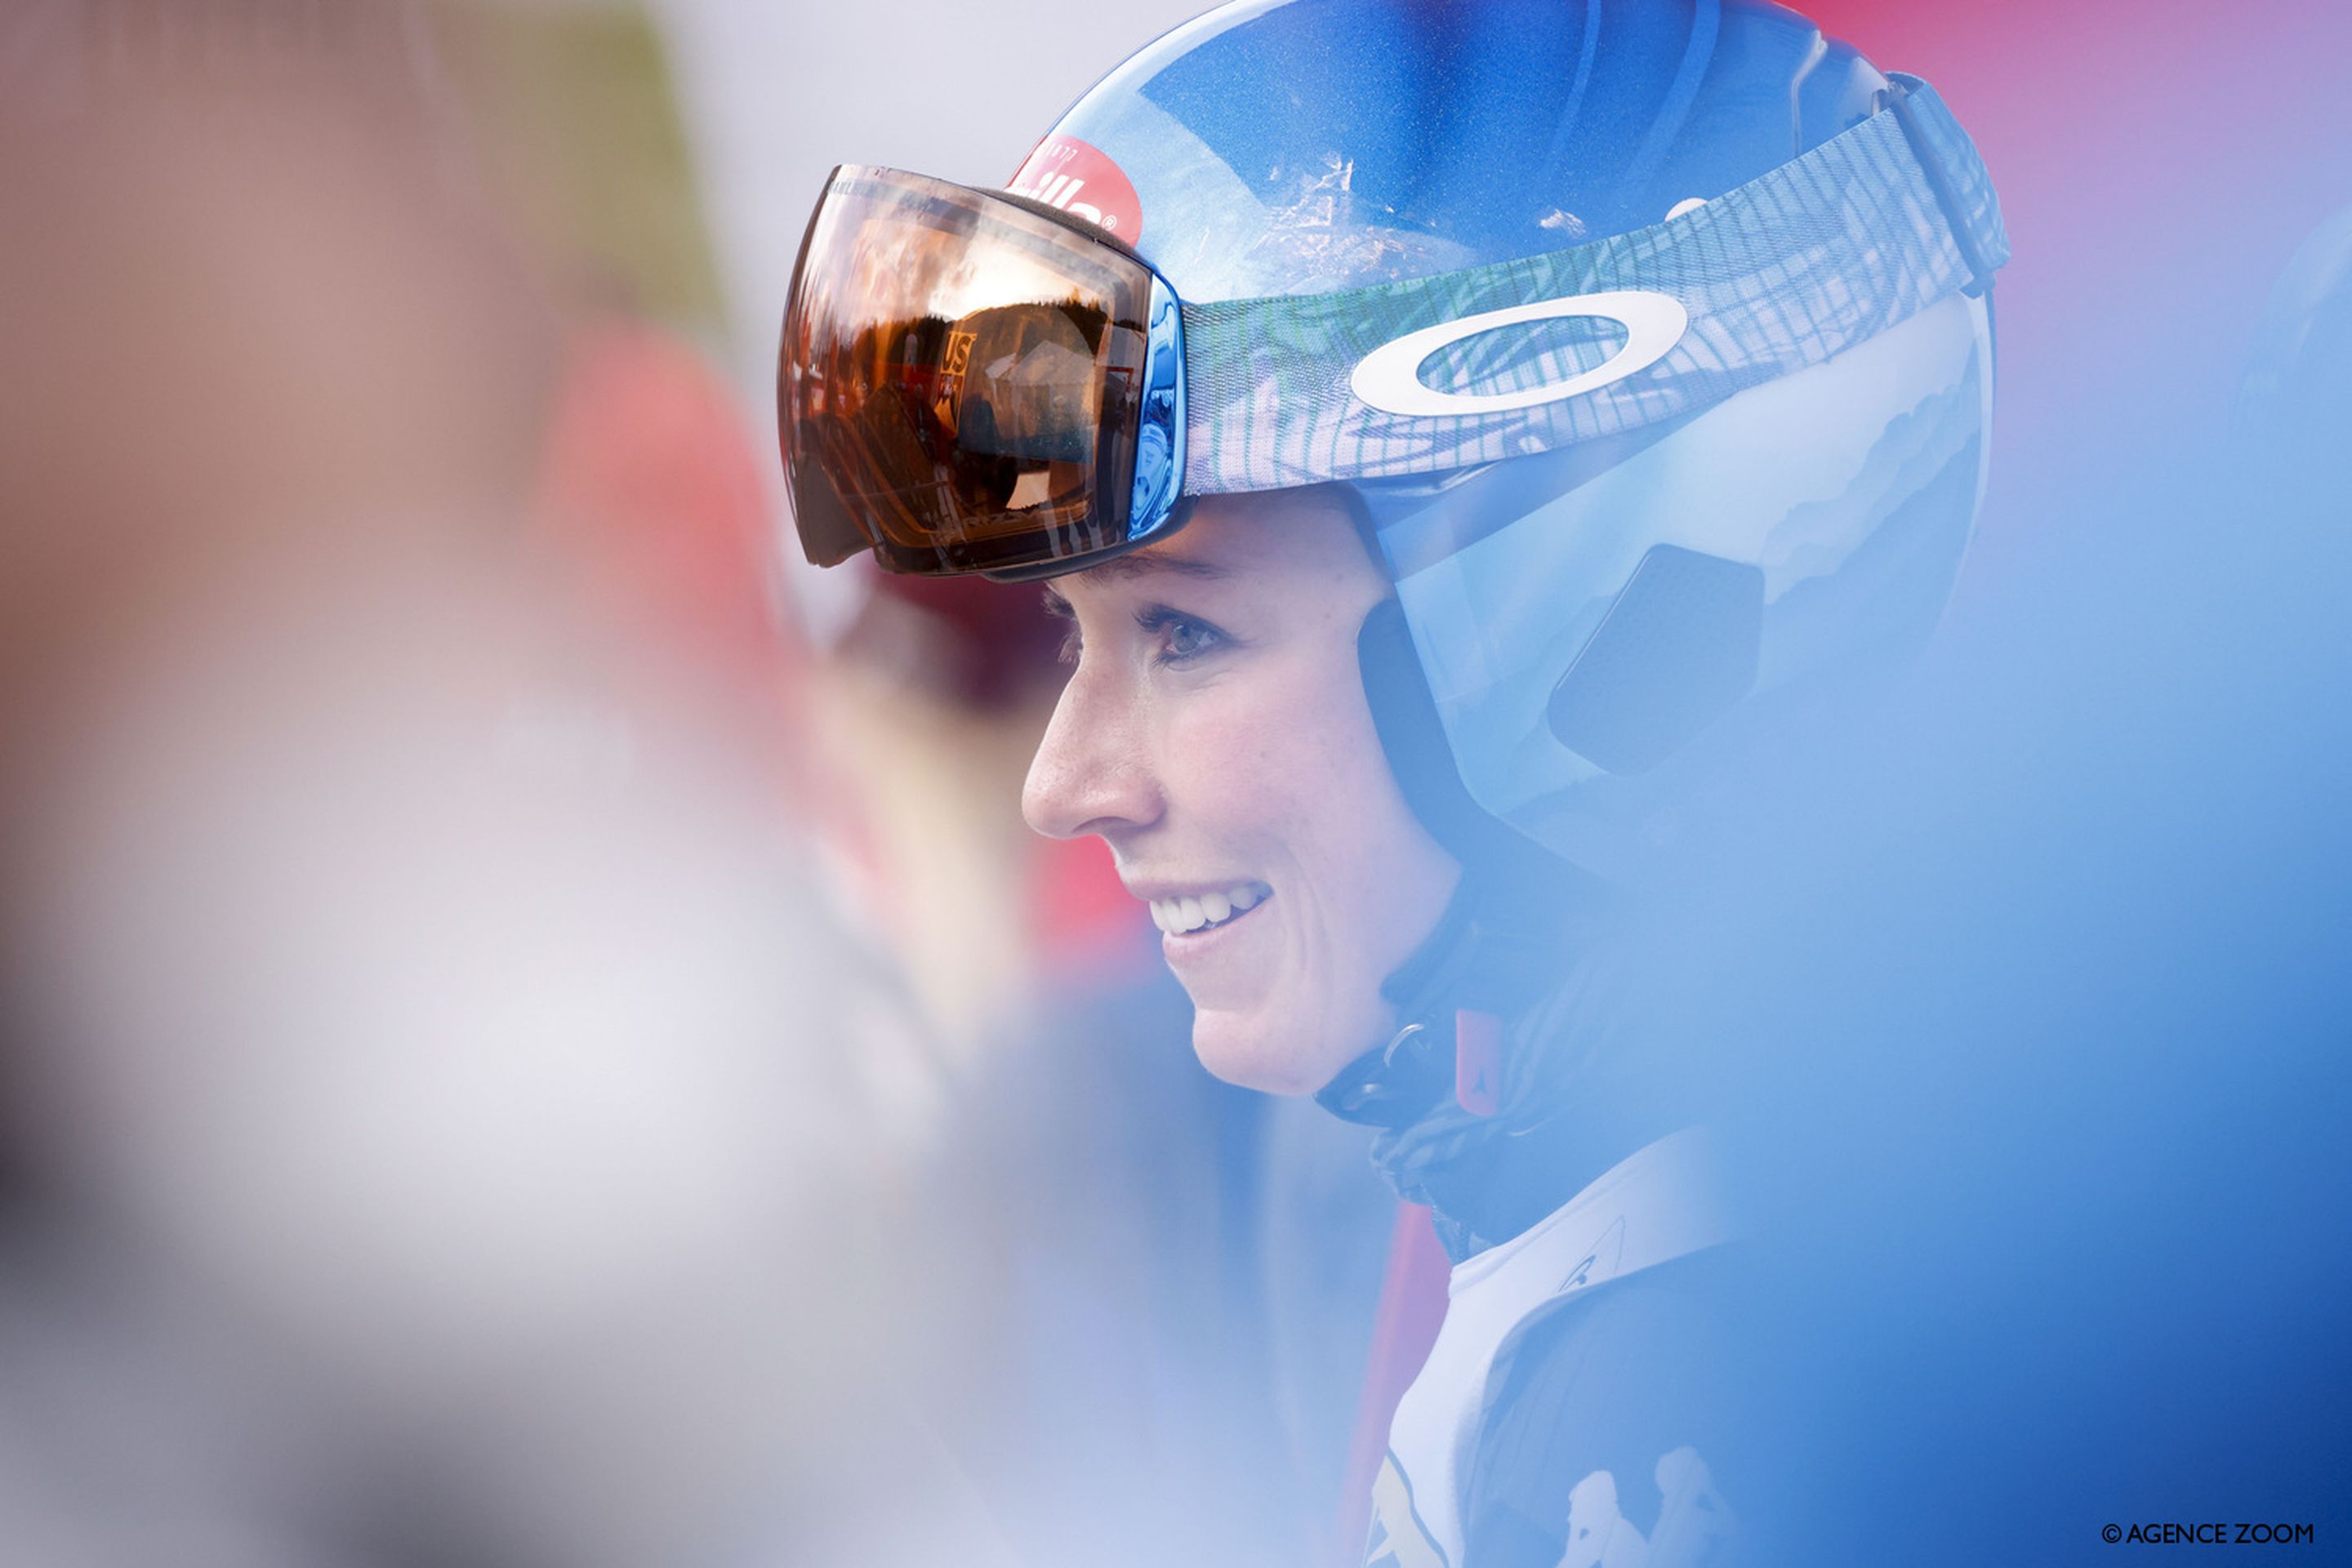 An emotional Shiffrin after the race (Agence Zoom)